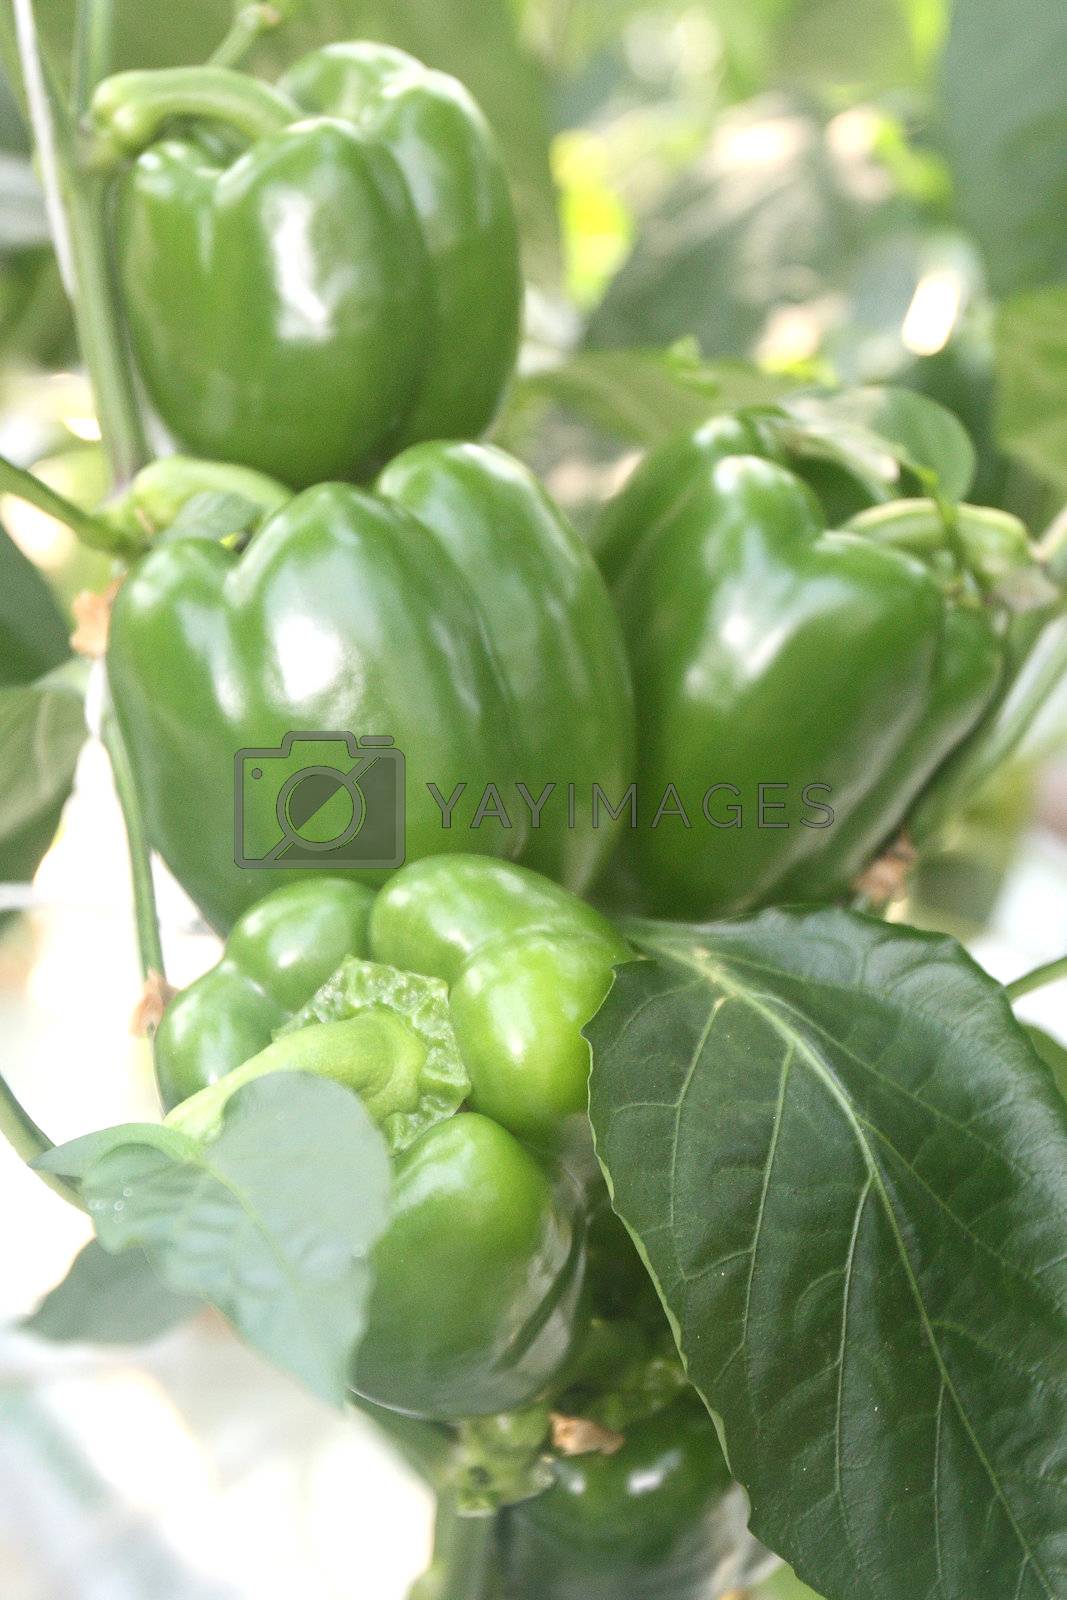 Royalty free image of Green peppers growing by shcheglov